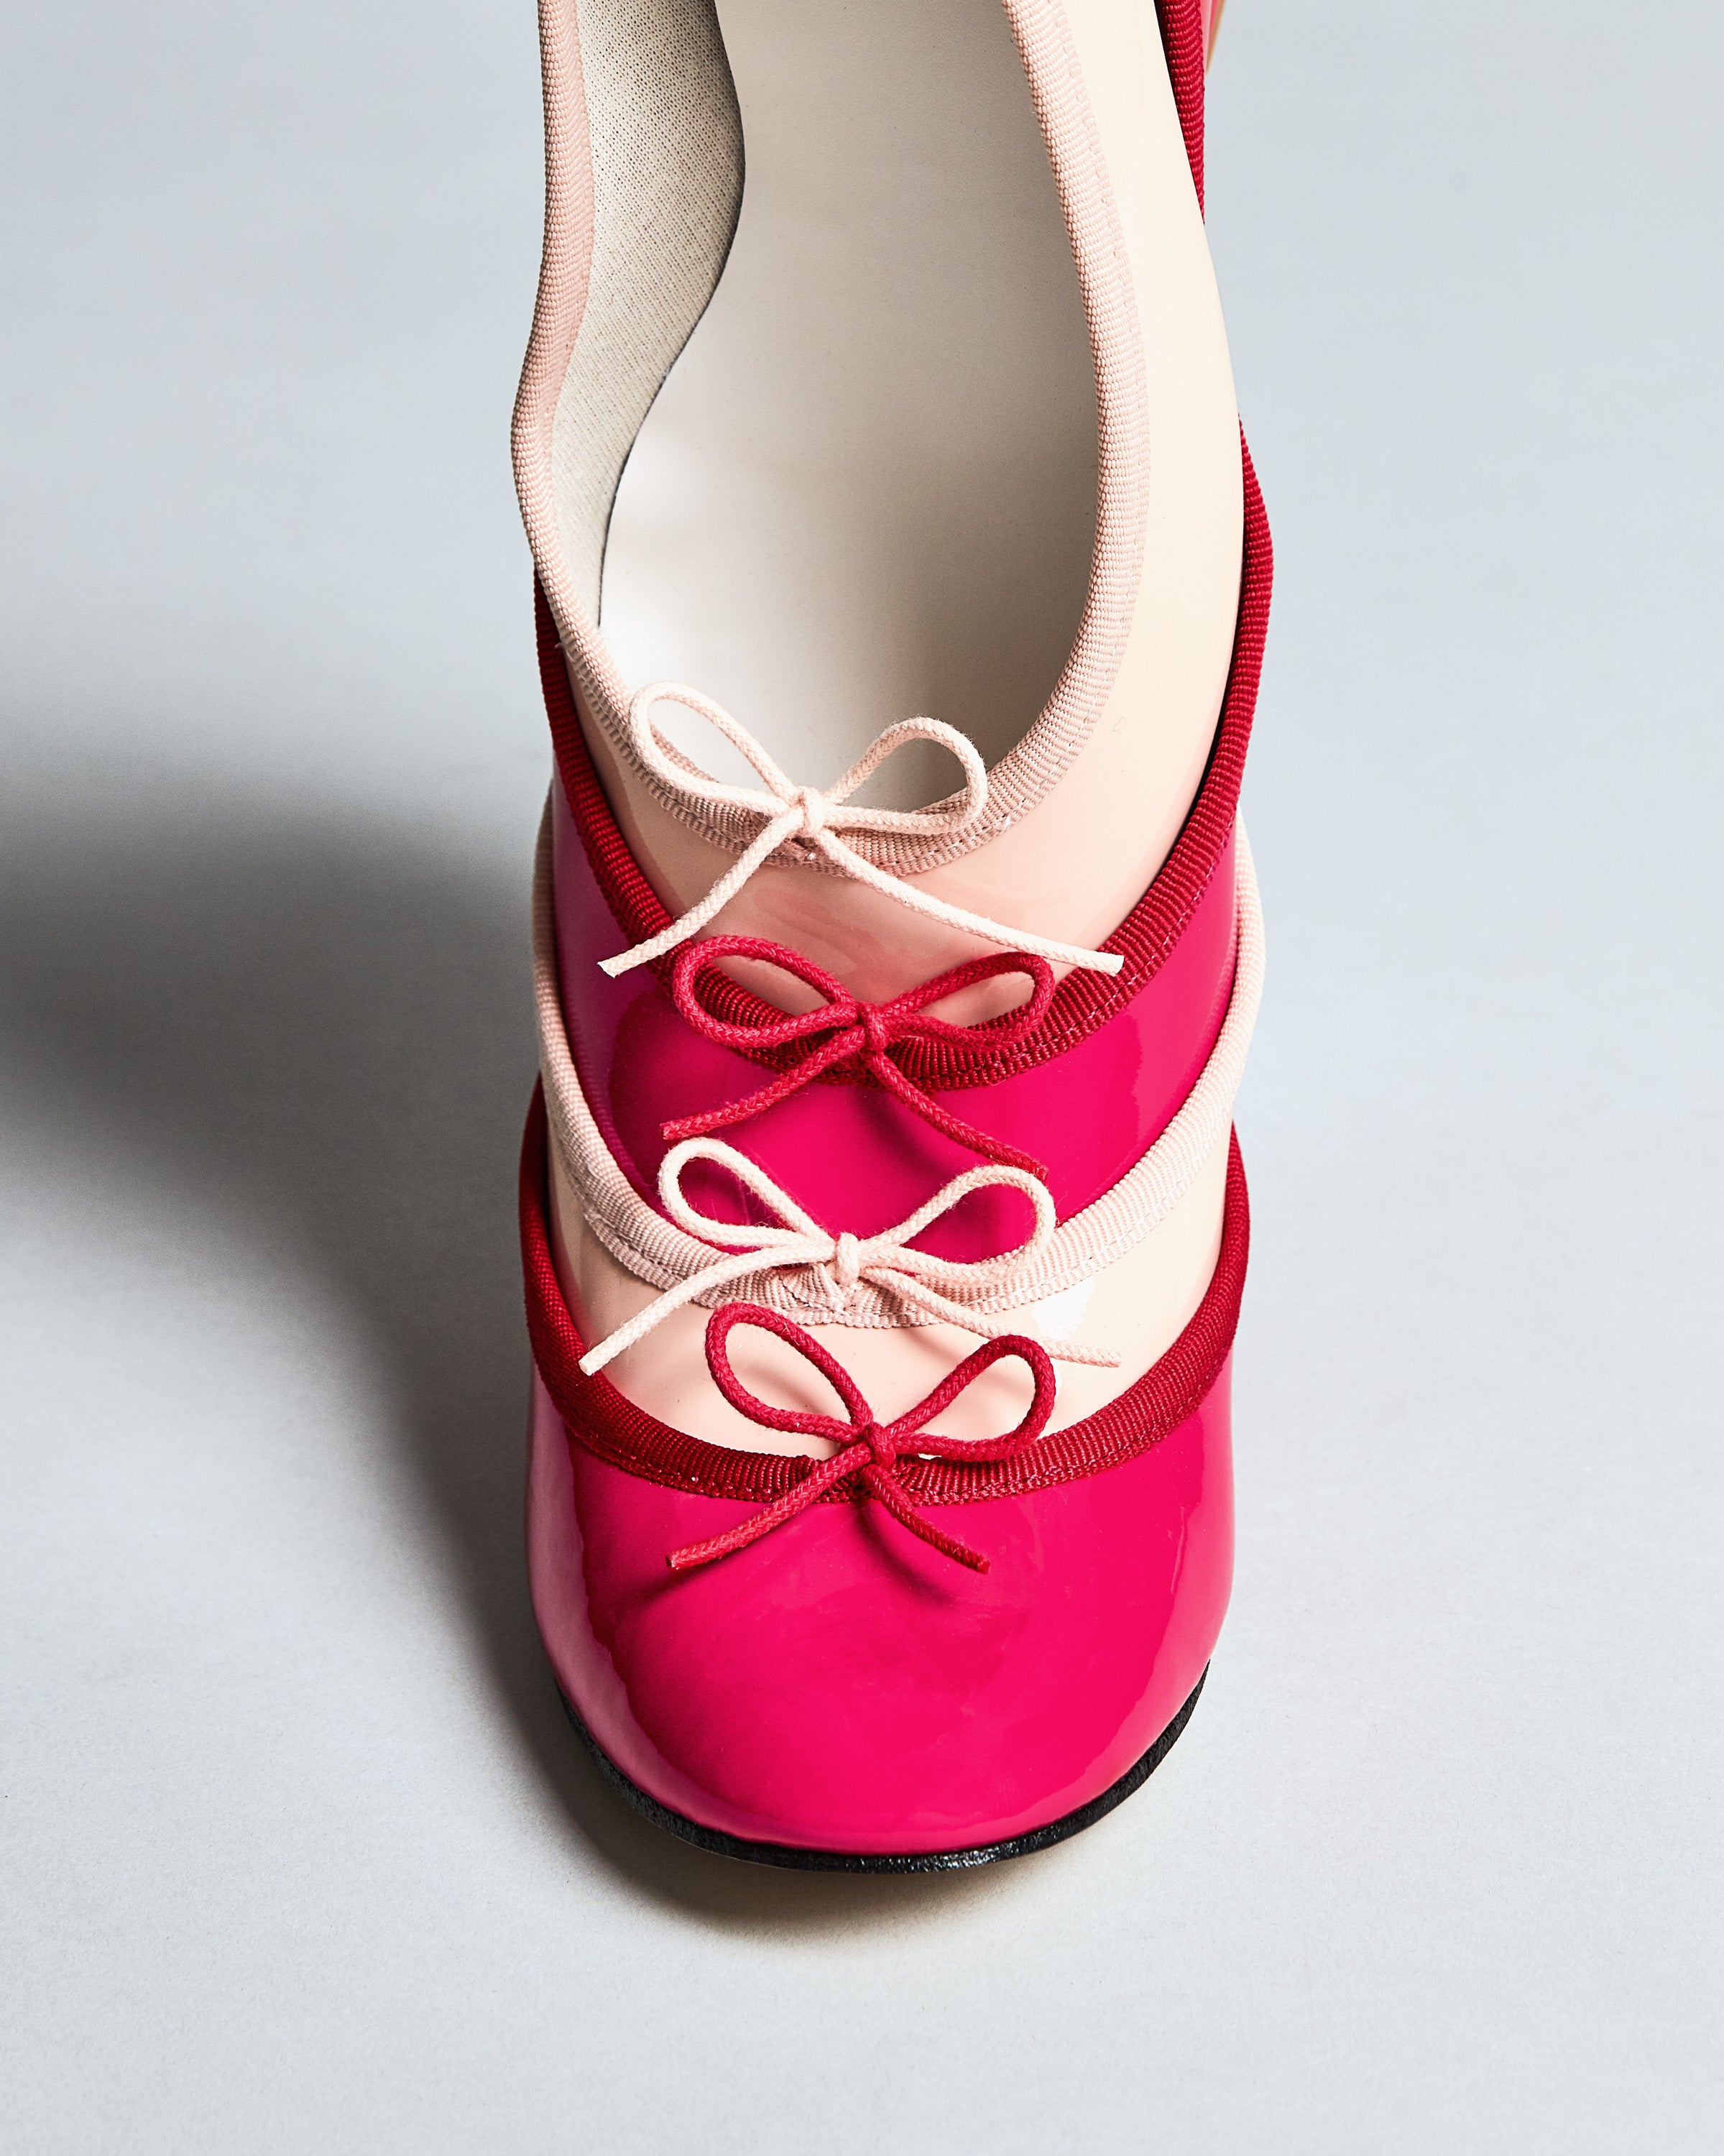 Repetto Paris - Luxury Made in France Shoes et Dance Collection